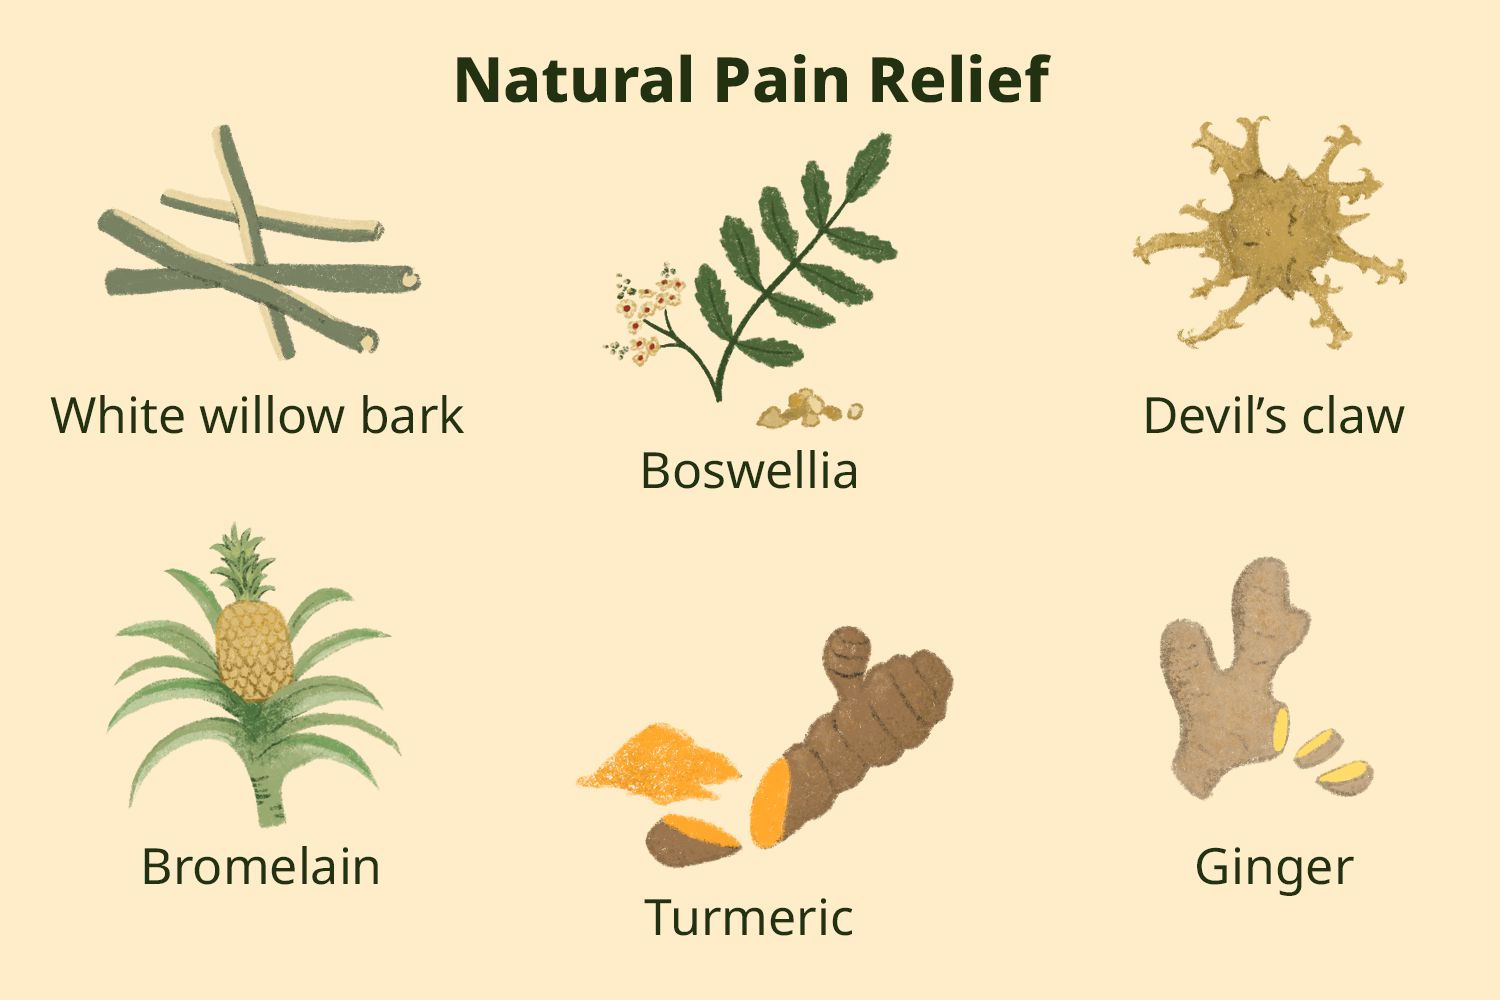 What are some natural supplements for pain relief?